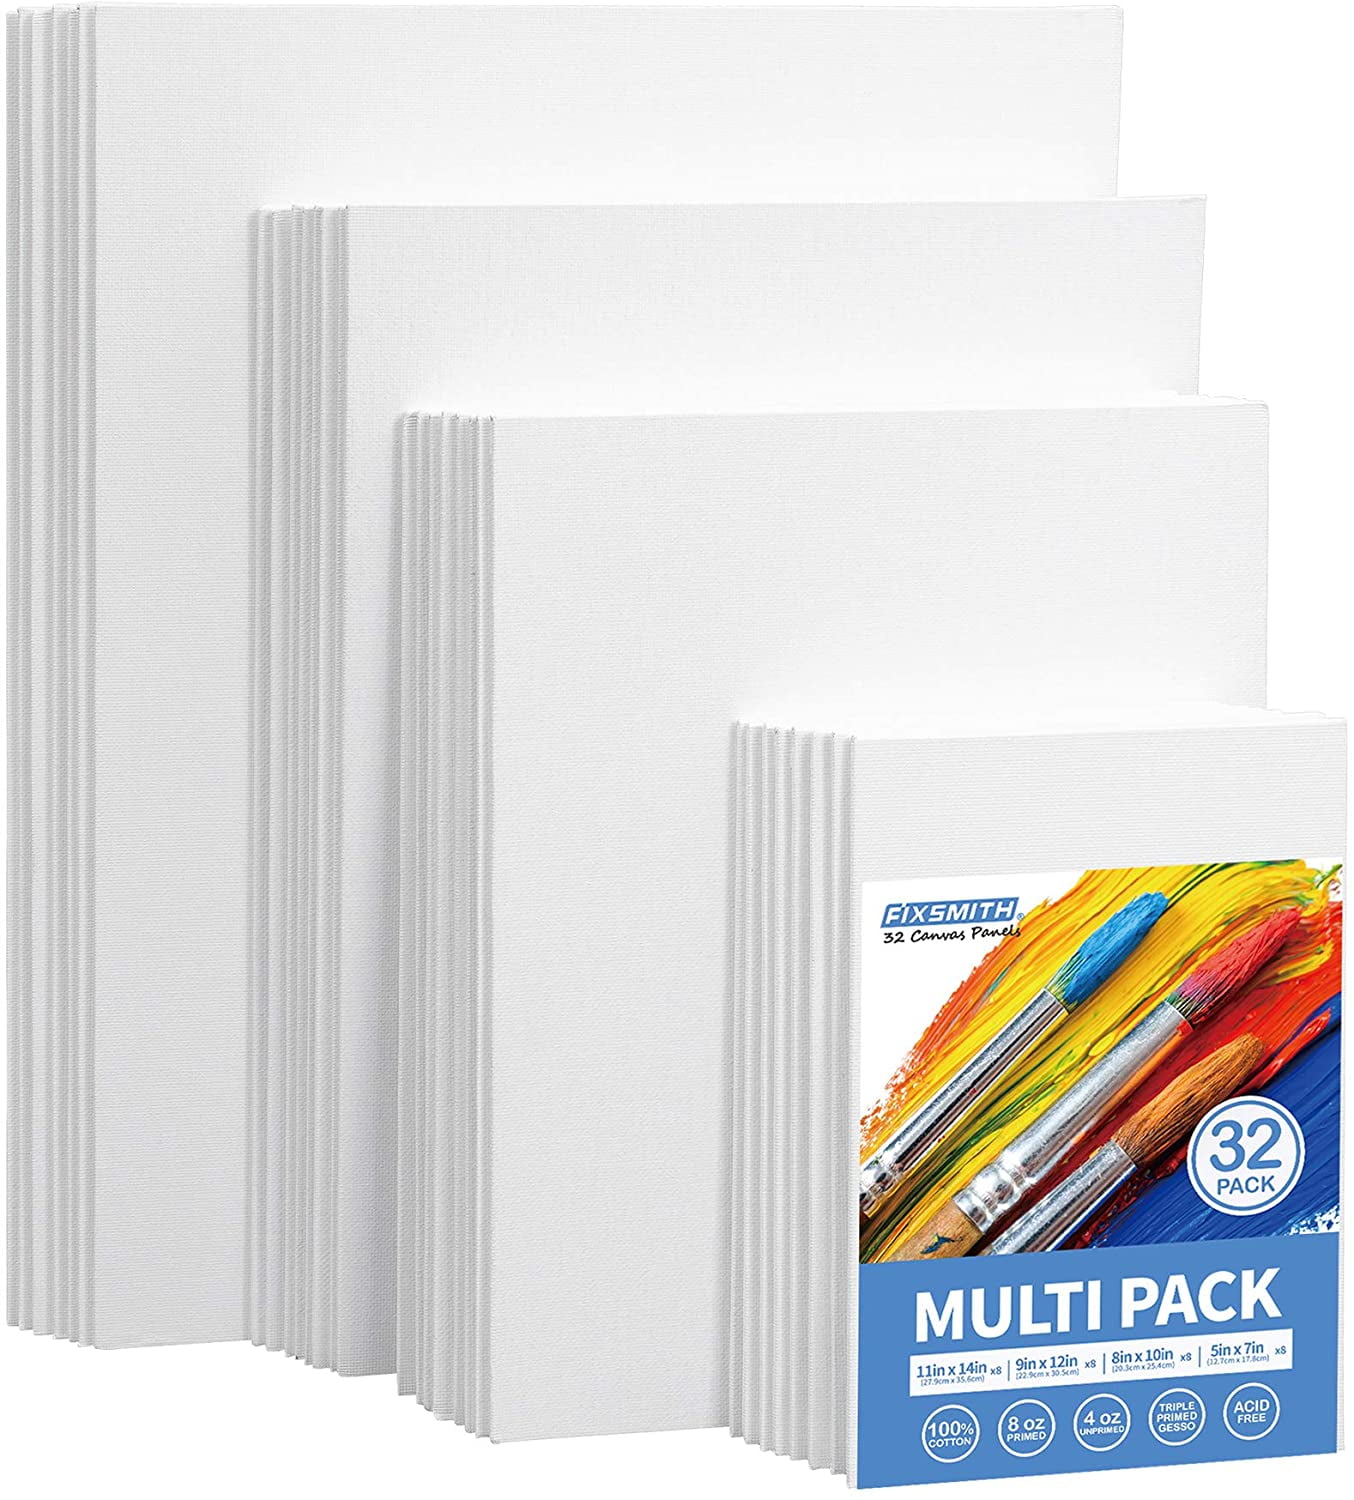 FIXSMITH Painting Canvas Panel Boards - 3x5 Inch Art Canvas,24 Pack Mini  Canvases,Primed Canvas Panels,100% Cotton,Acid Free,Professional Quality